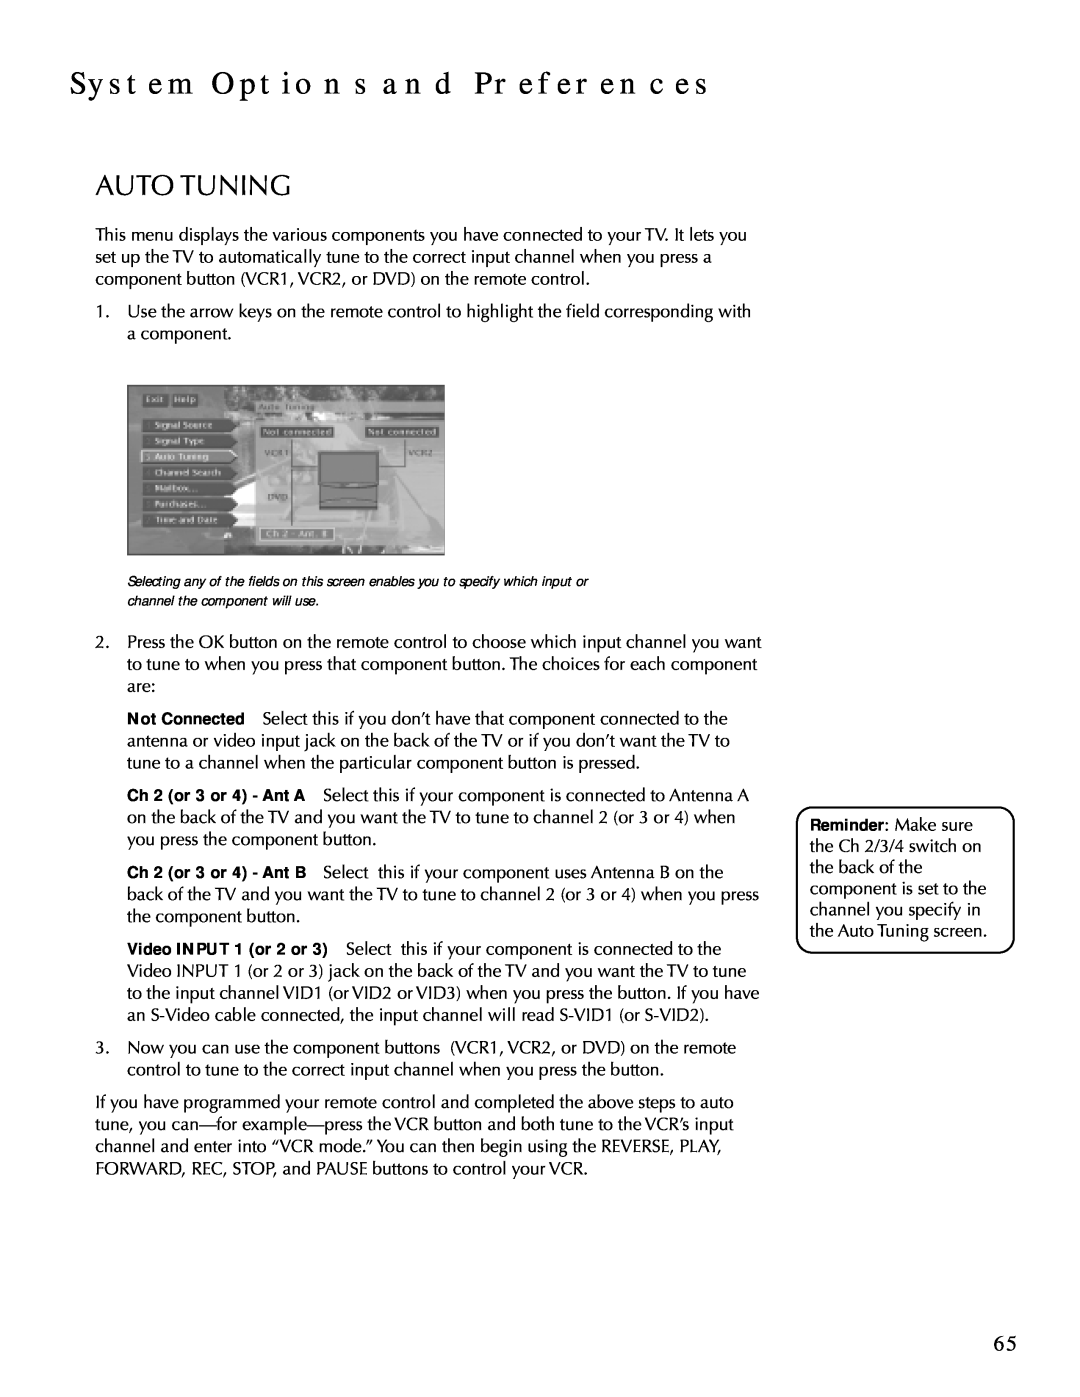 DirecTV HDTV user manual Auto Tuning, System Options And Preferences 